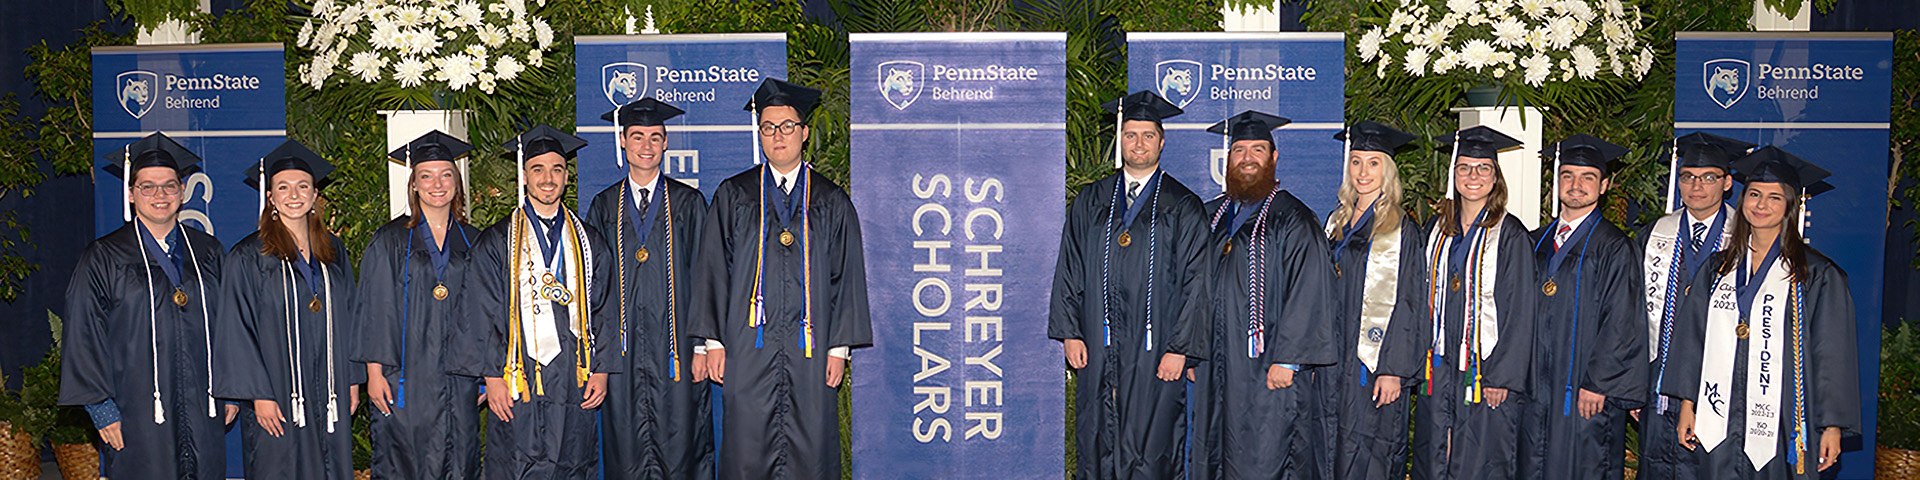 Thirteen Schreyer Honors College graduates in academic gowns and caps stand near banner.